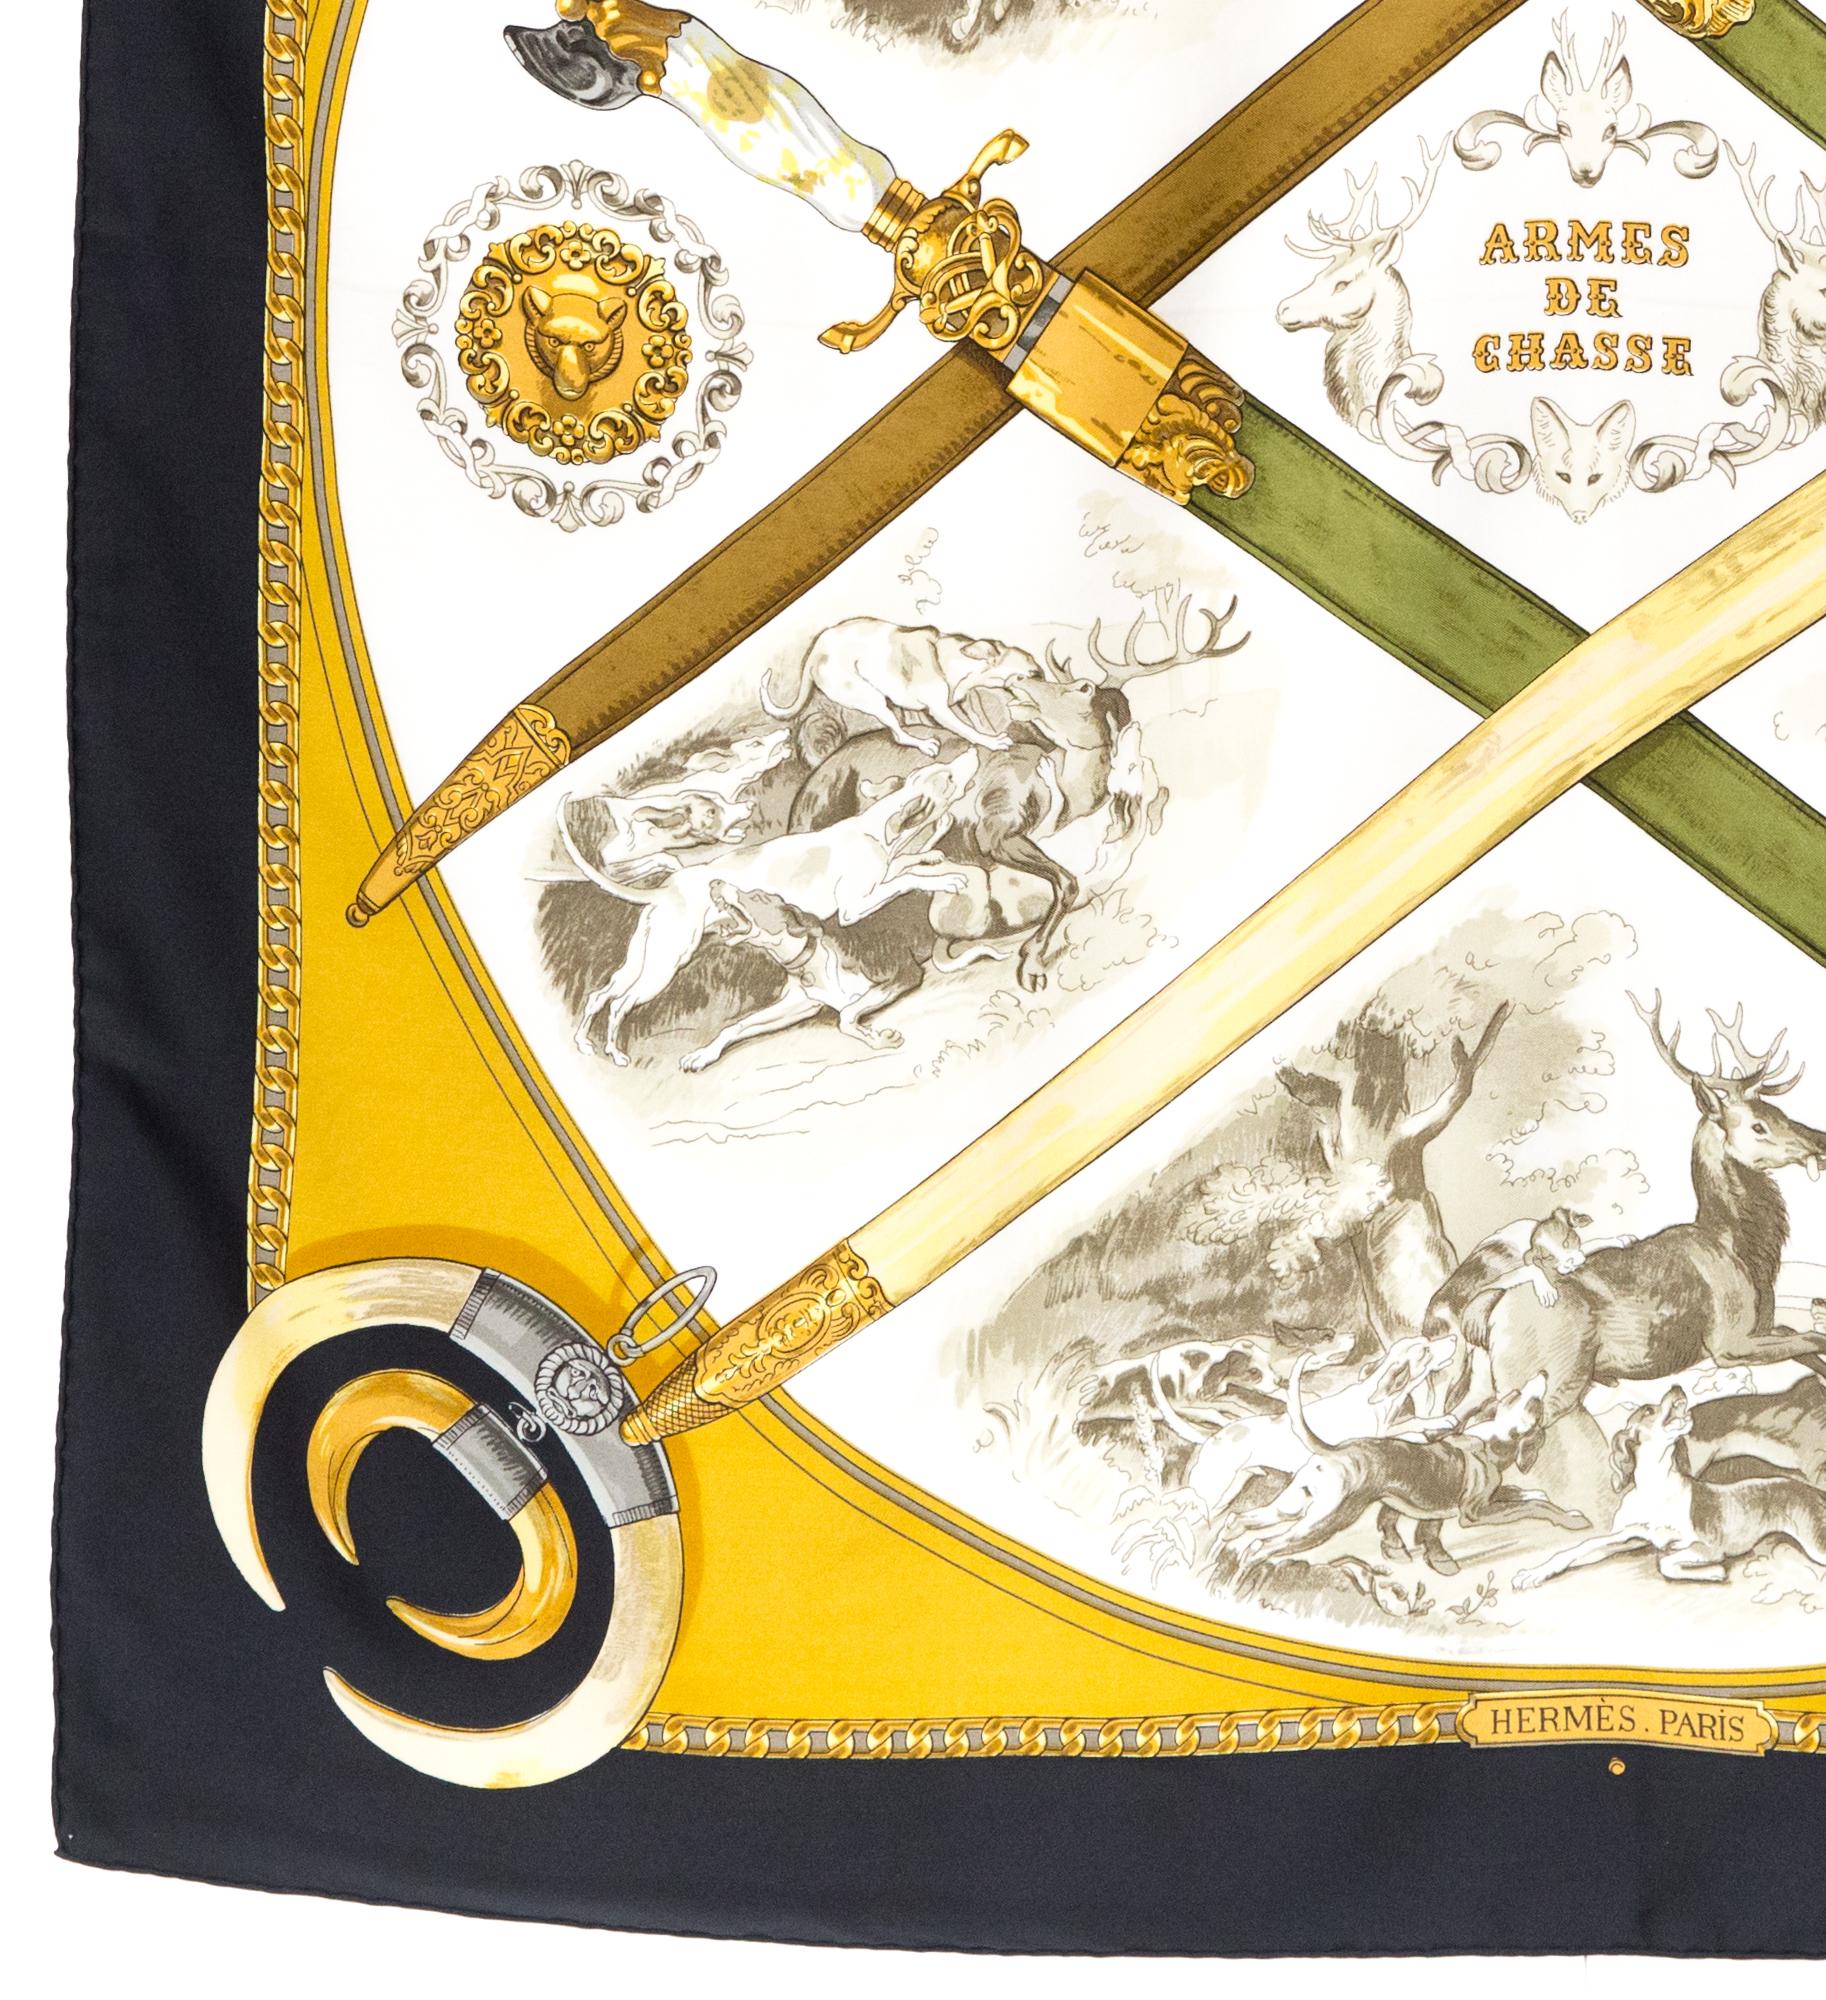 Hermes Armes de chasse by Philippe Ledoux Silk Scarf 1